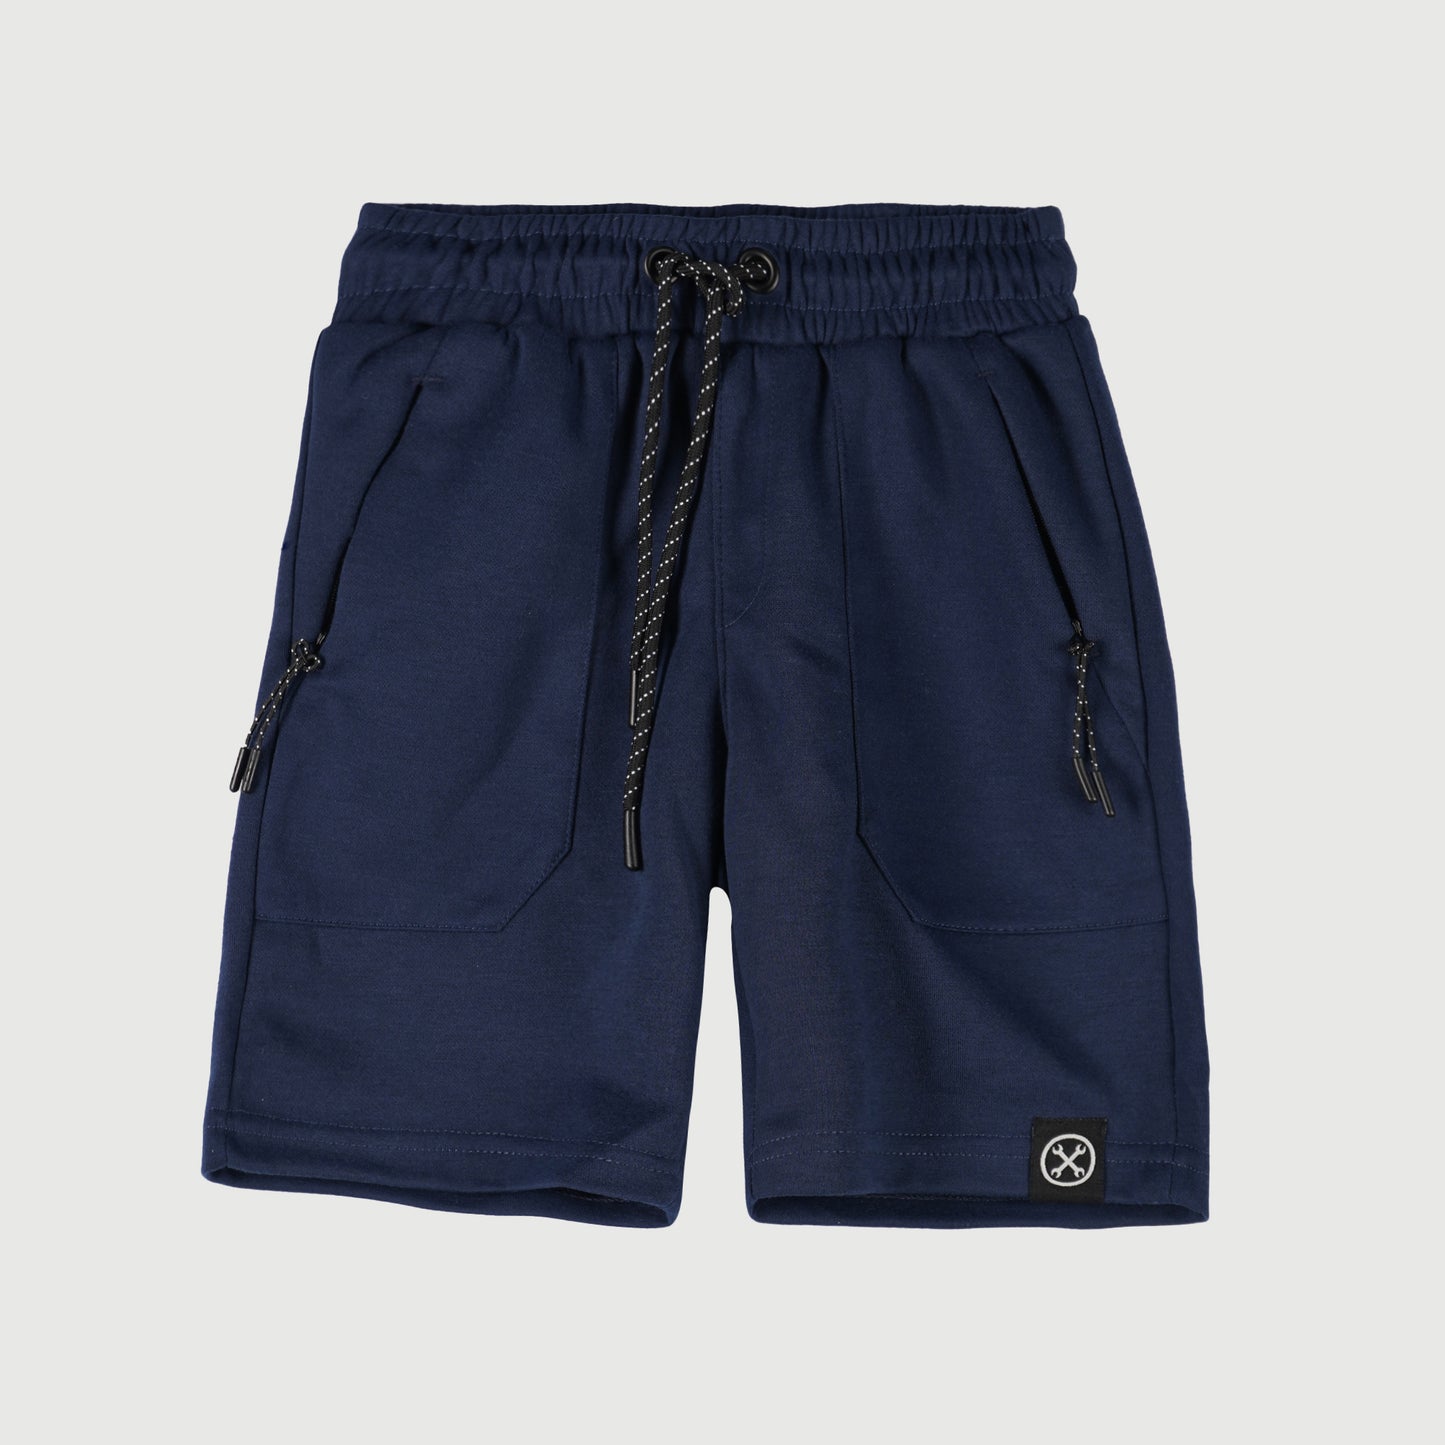 Petrol Kids Wear Basic Non-Denim Jogger shorts For Kids Trendy Fashion High Quality Apparel Comfortable Casual short For Kids 122033 (Navy)